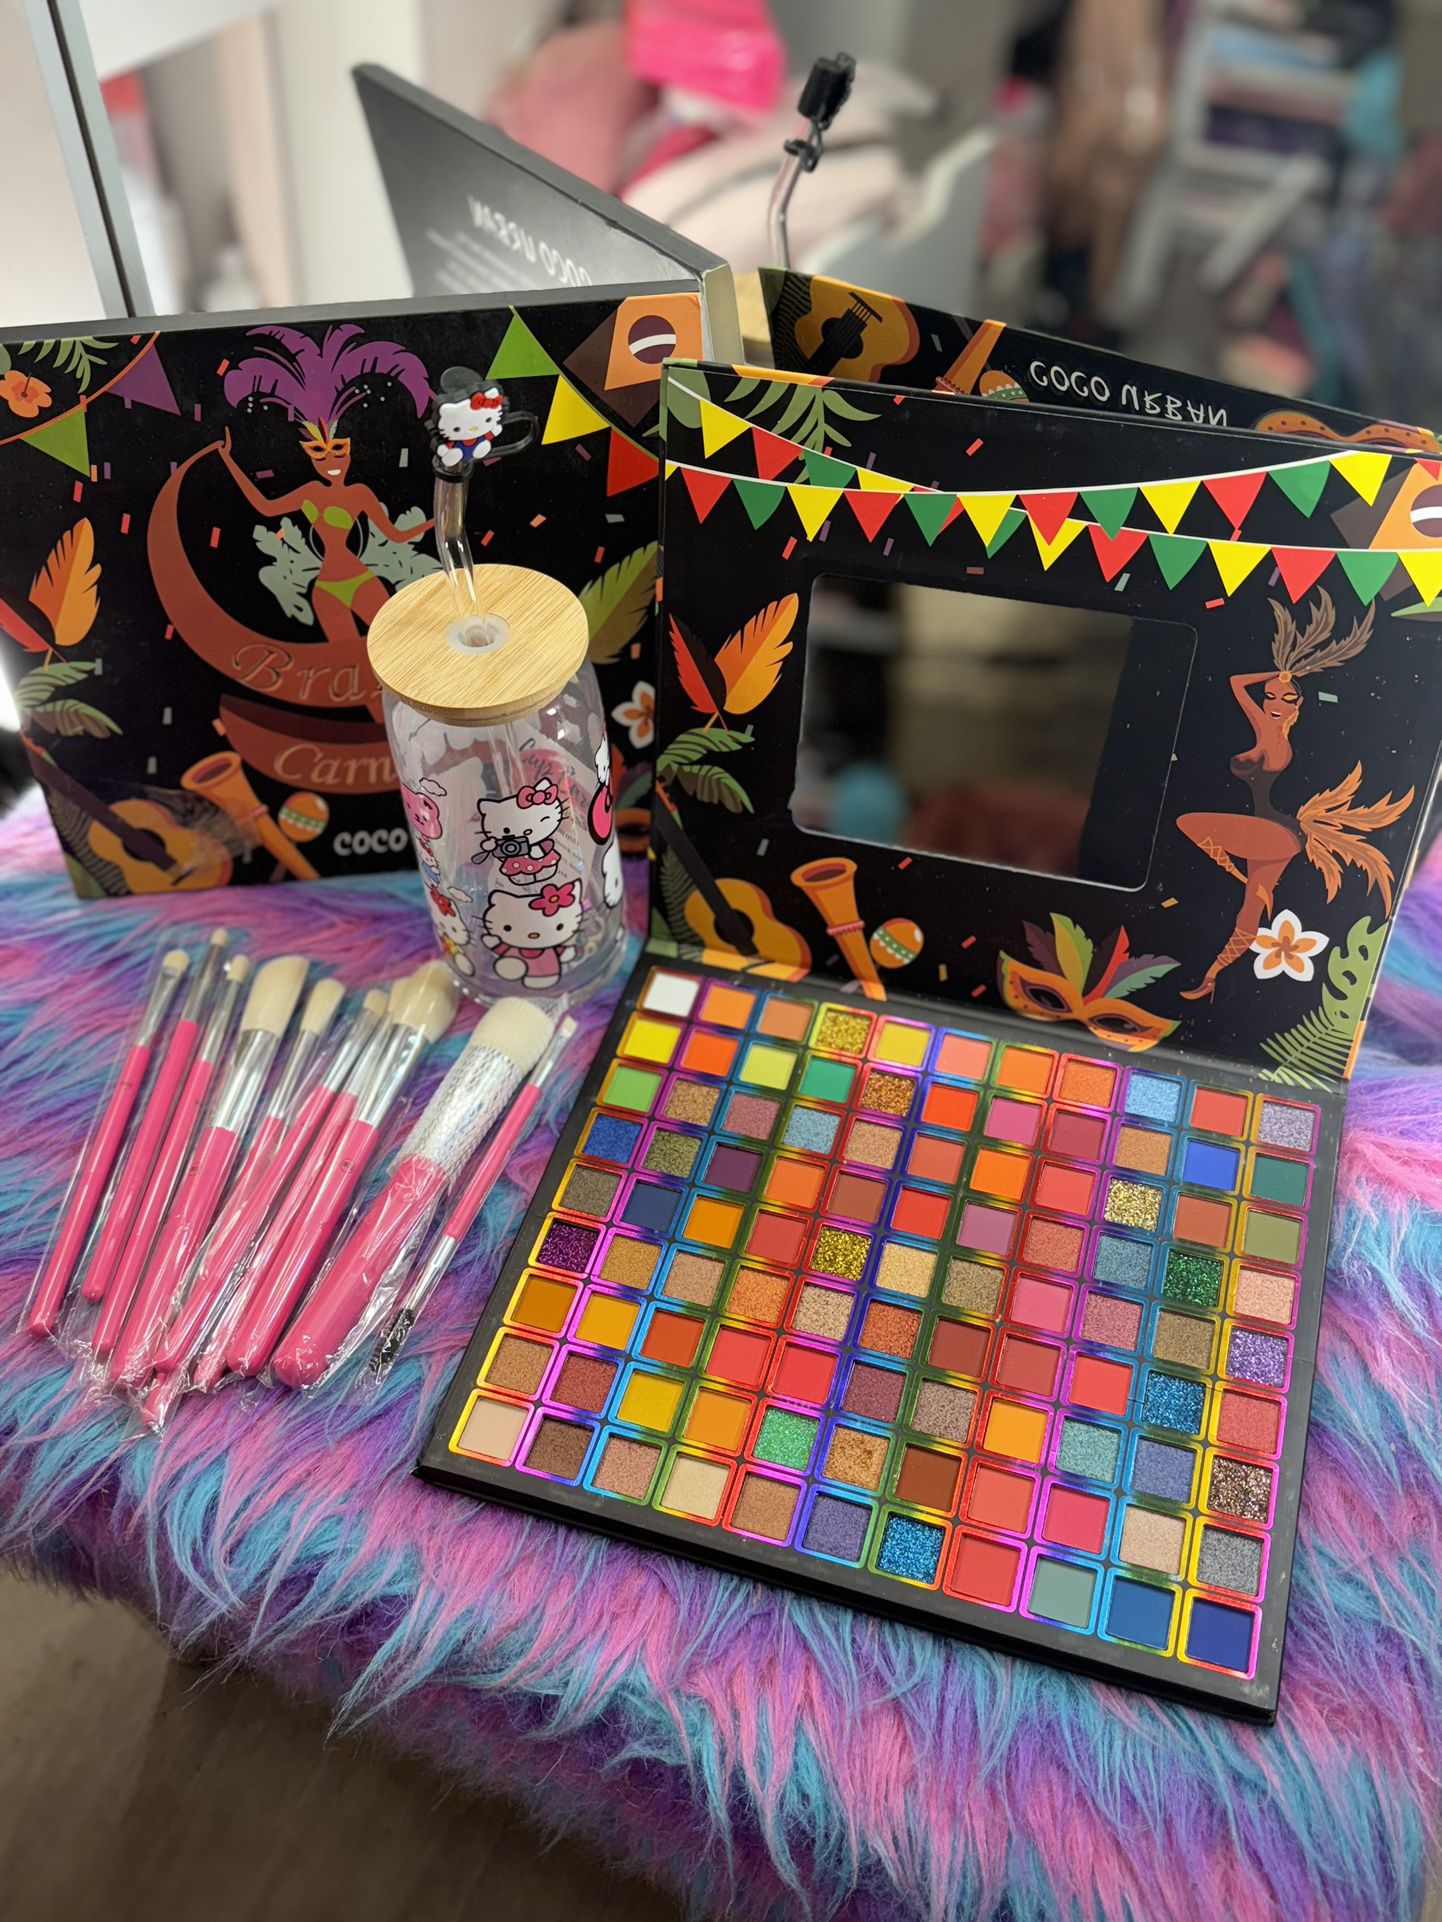 Mothers Day Gift 💝 Bundle 💗 Brazilian Carnival 🎡 Big Eyeshadow Palette 🎨 With Many Different Colors / Set Of Pink Make up Brushes / Glass Cup 💓